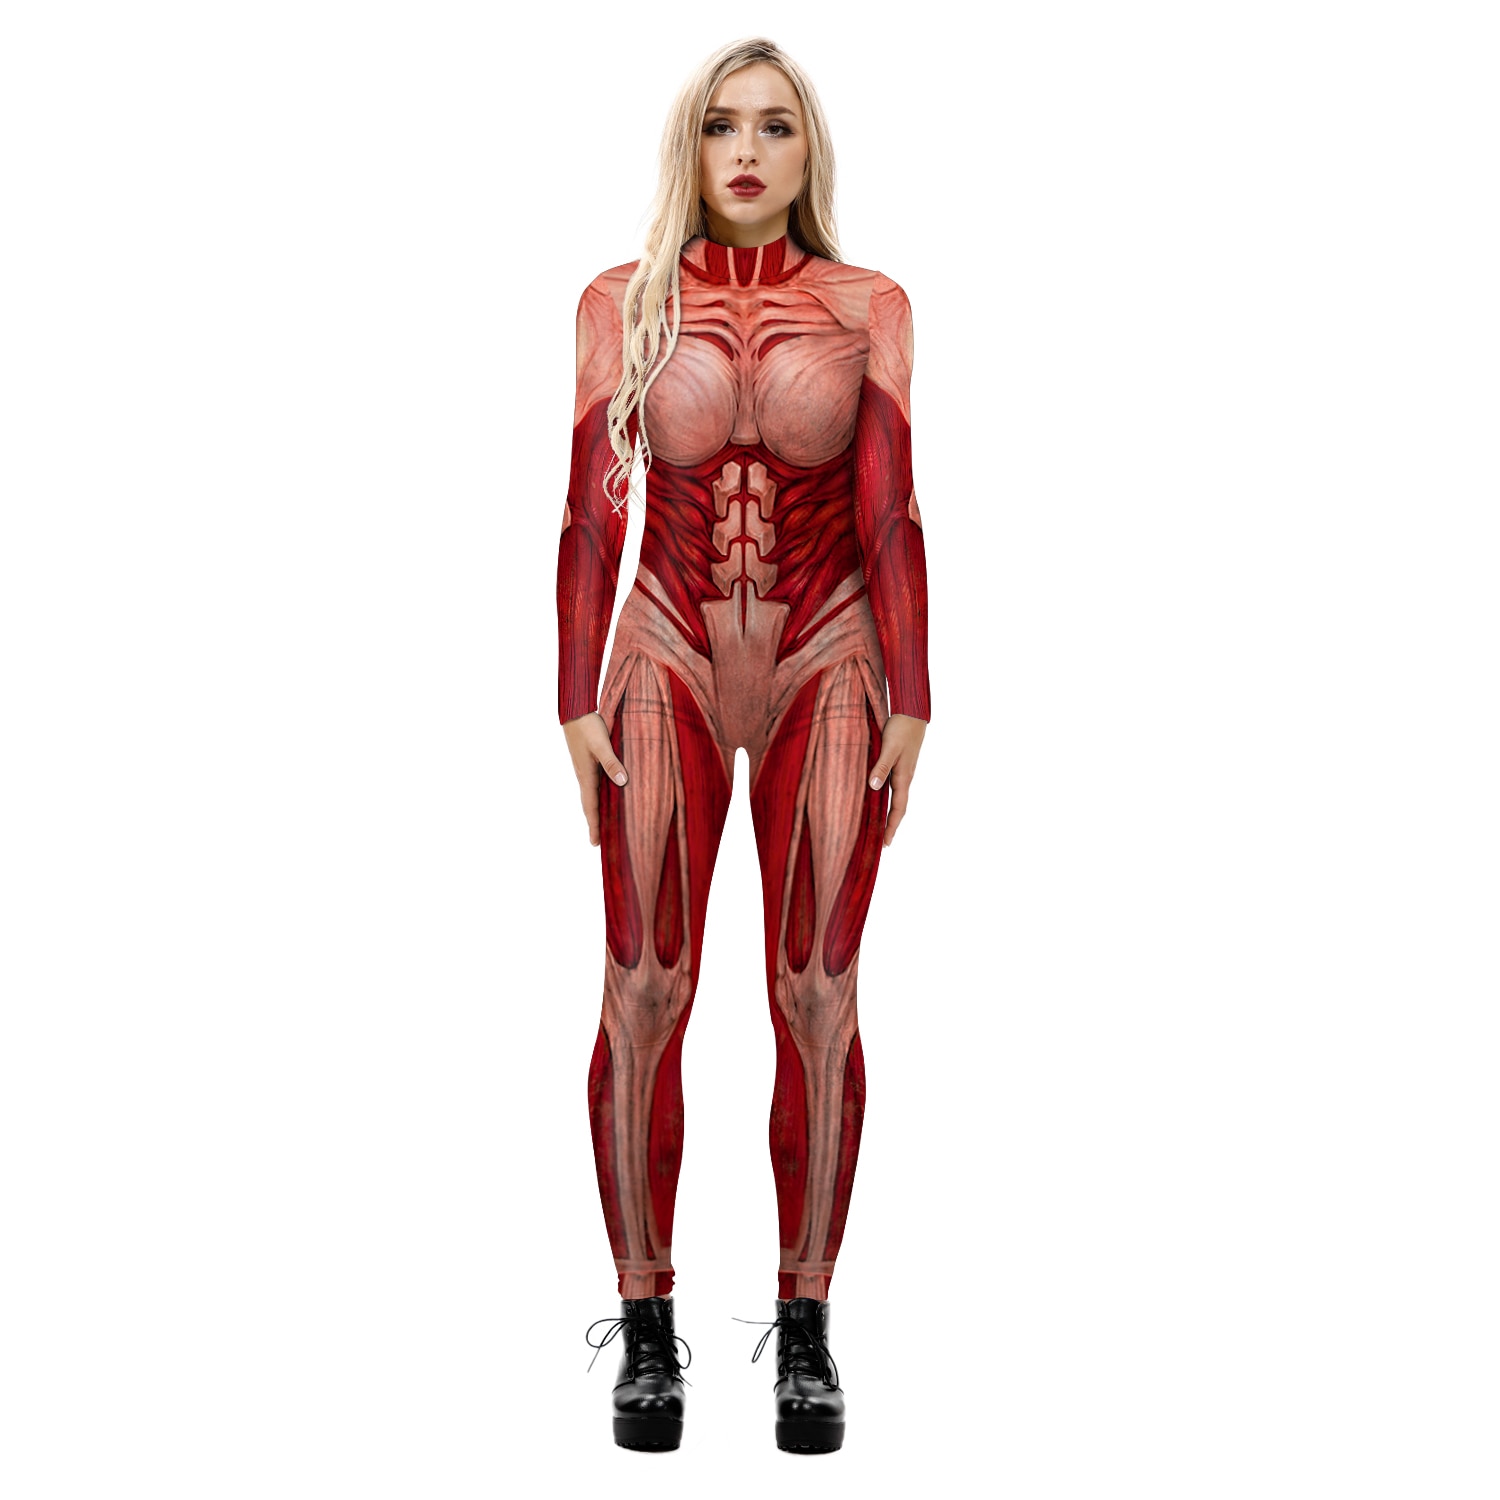 Attack On Titan Cosplay Costumes Halloween Party Jumpsuits Skeleton Printed Jumpsuit Women Leonhart Muscle Outfits for - Attack On Titan Shop